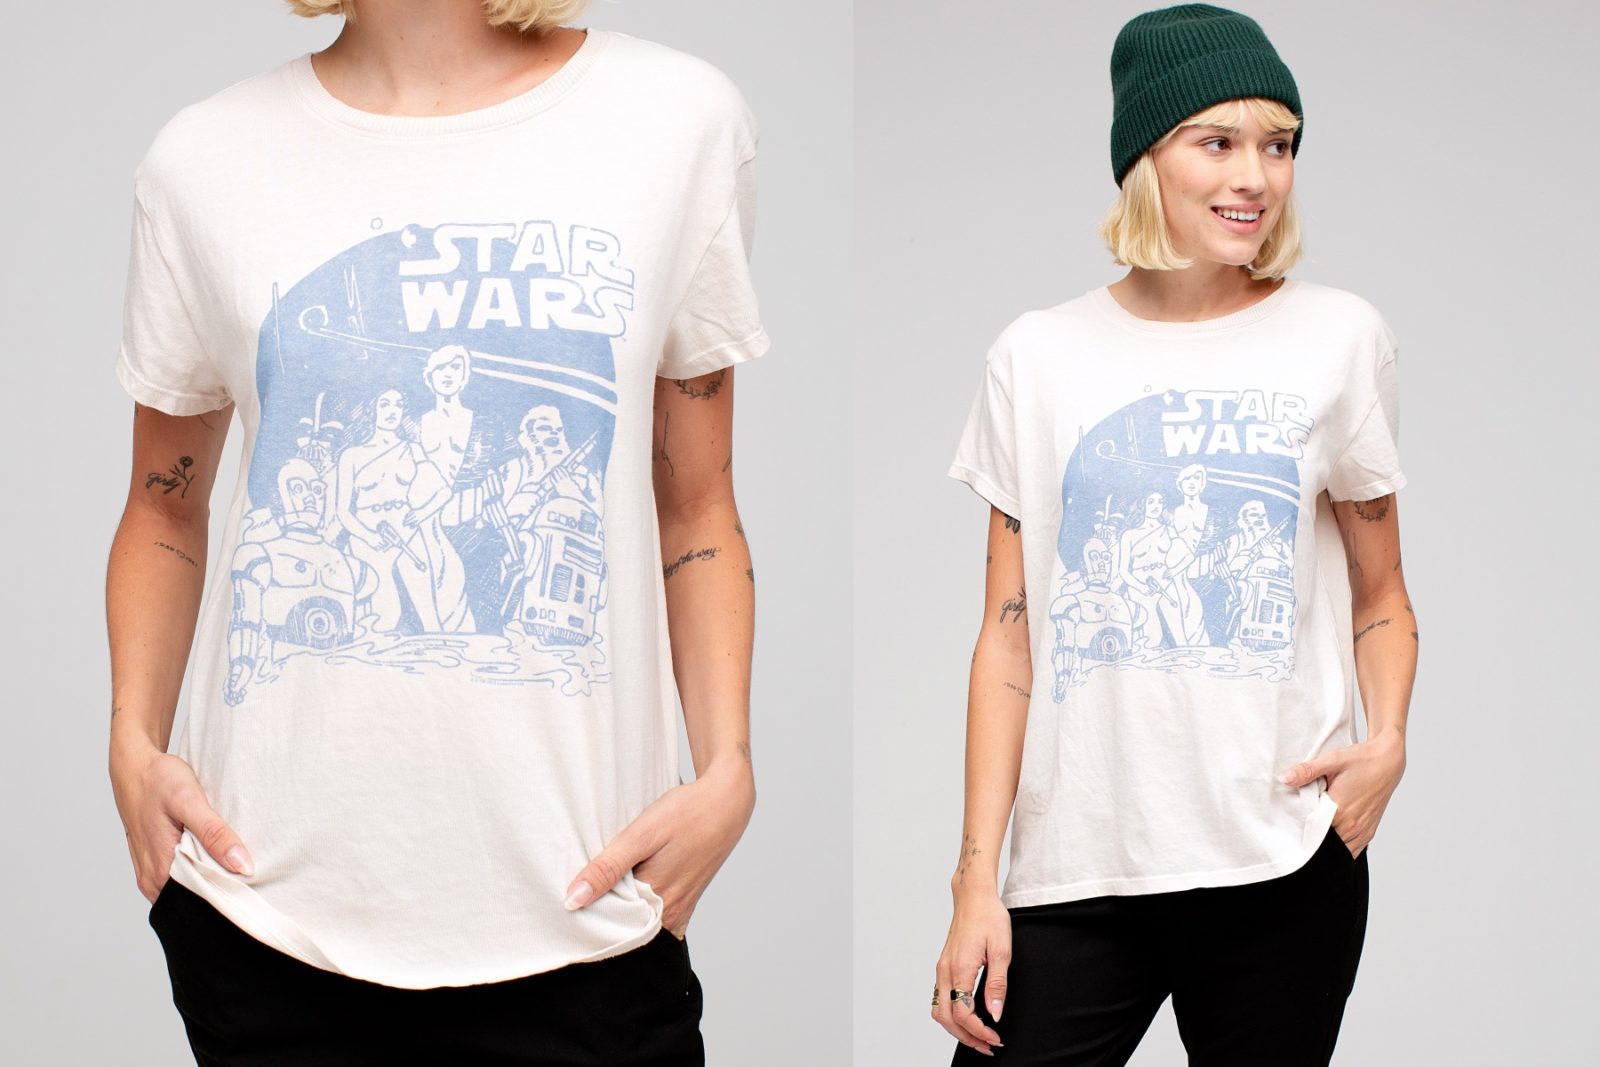 Women's Star Wars Vintage Style T-Shirt by Junk Food Clothing